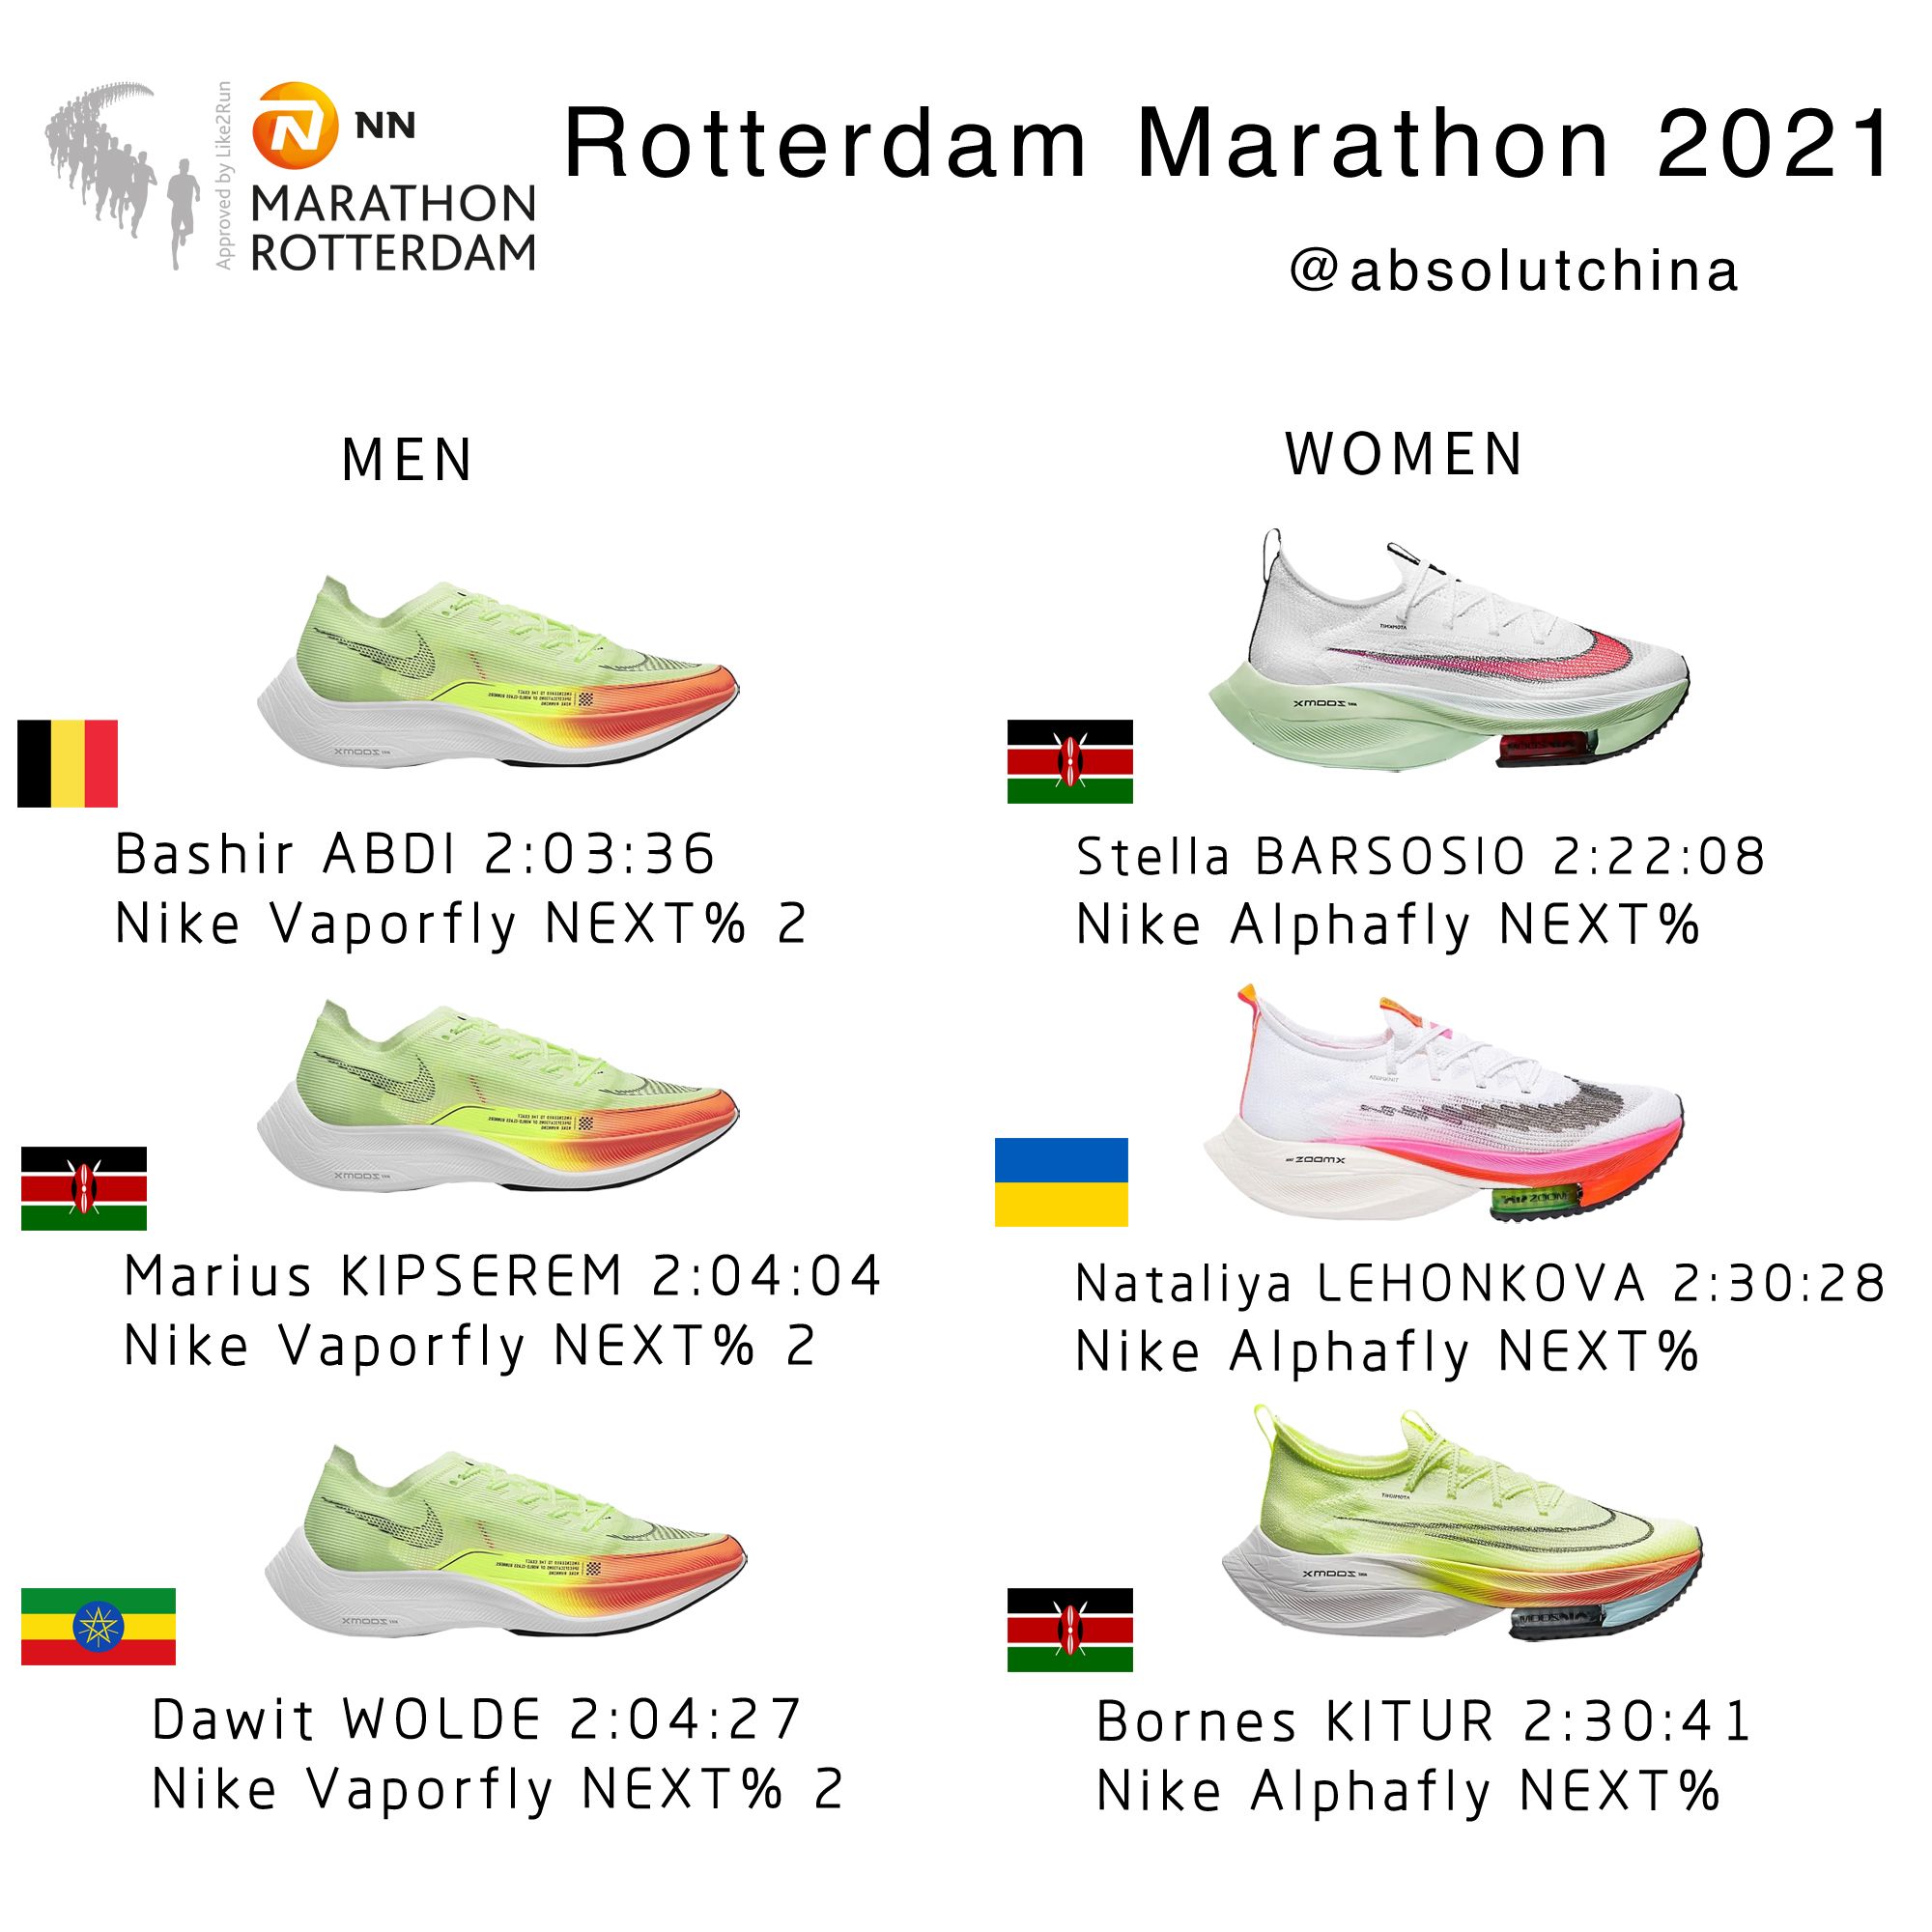 Weng Da a Tuwita: "Rotterdam Marathon 2021 podium shoes. There are only a  few of photo and video I can check, and the video's resolution is too low.  So I am not